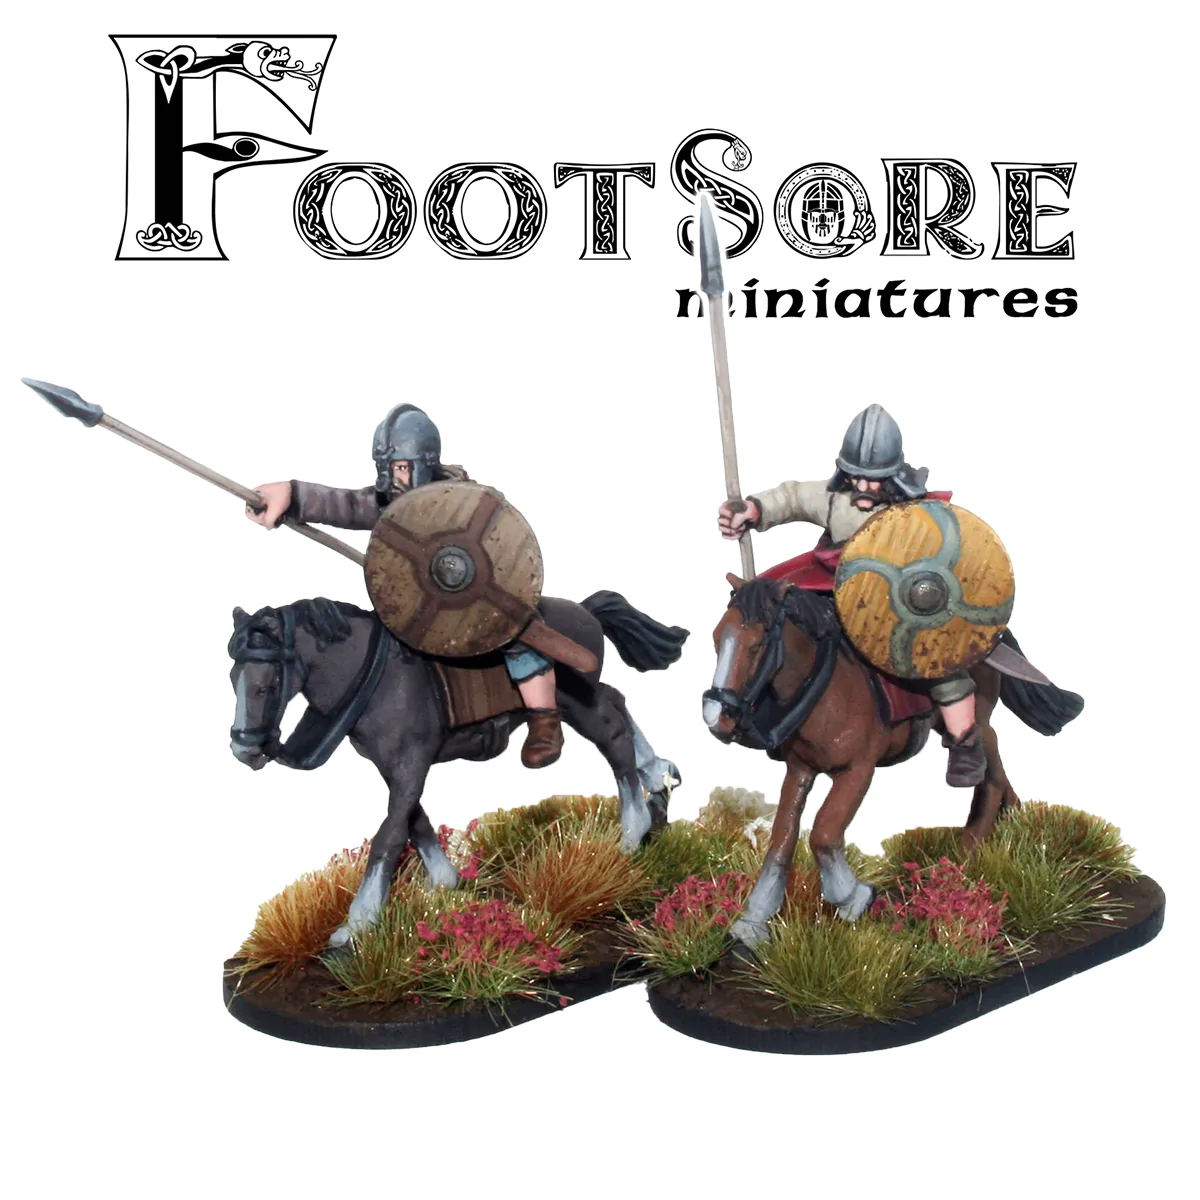 Footsore Miniatures 03WLS207HPY Welsh Light Cavalry with Spears